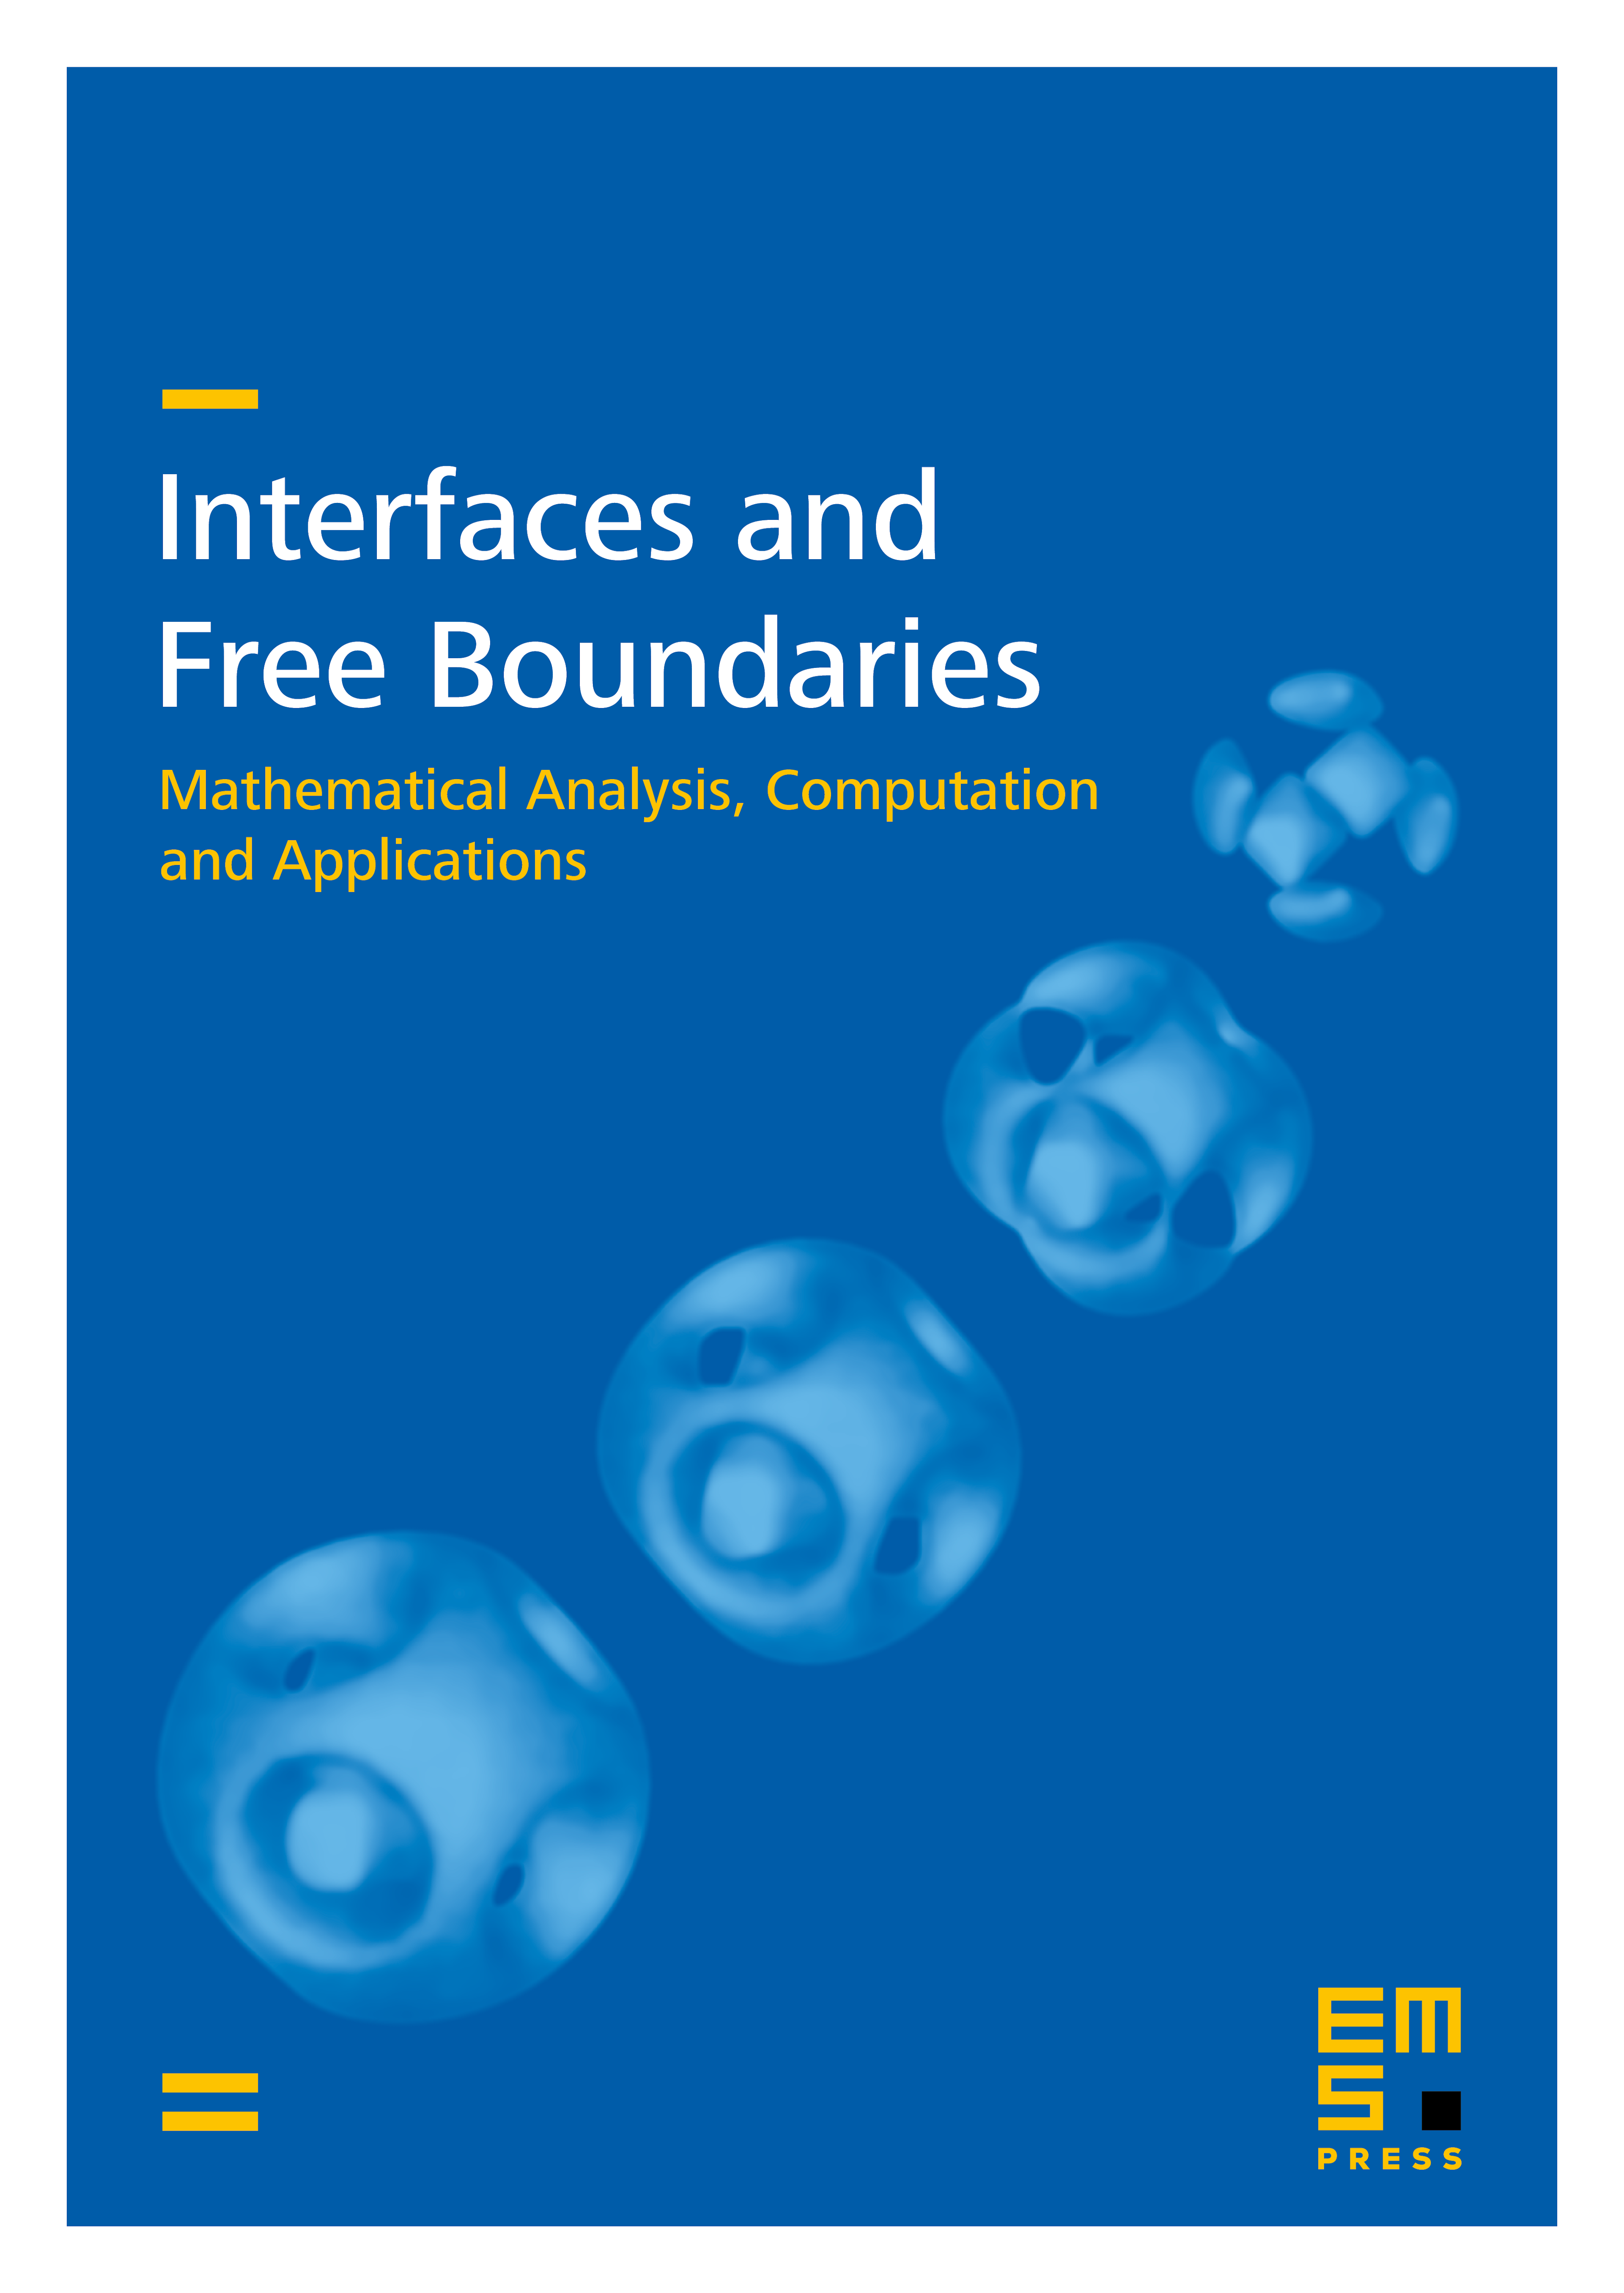 A numerical scheme for axisymmetric solutions of curvature-driven free boundary problems, with applications to the Willmore flow cover